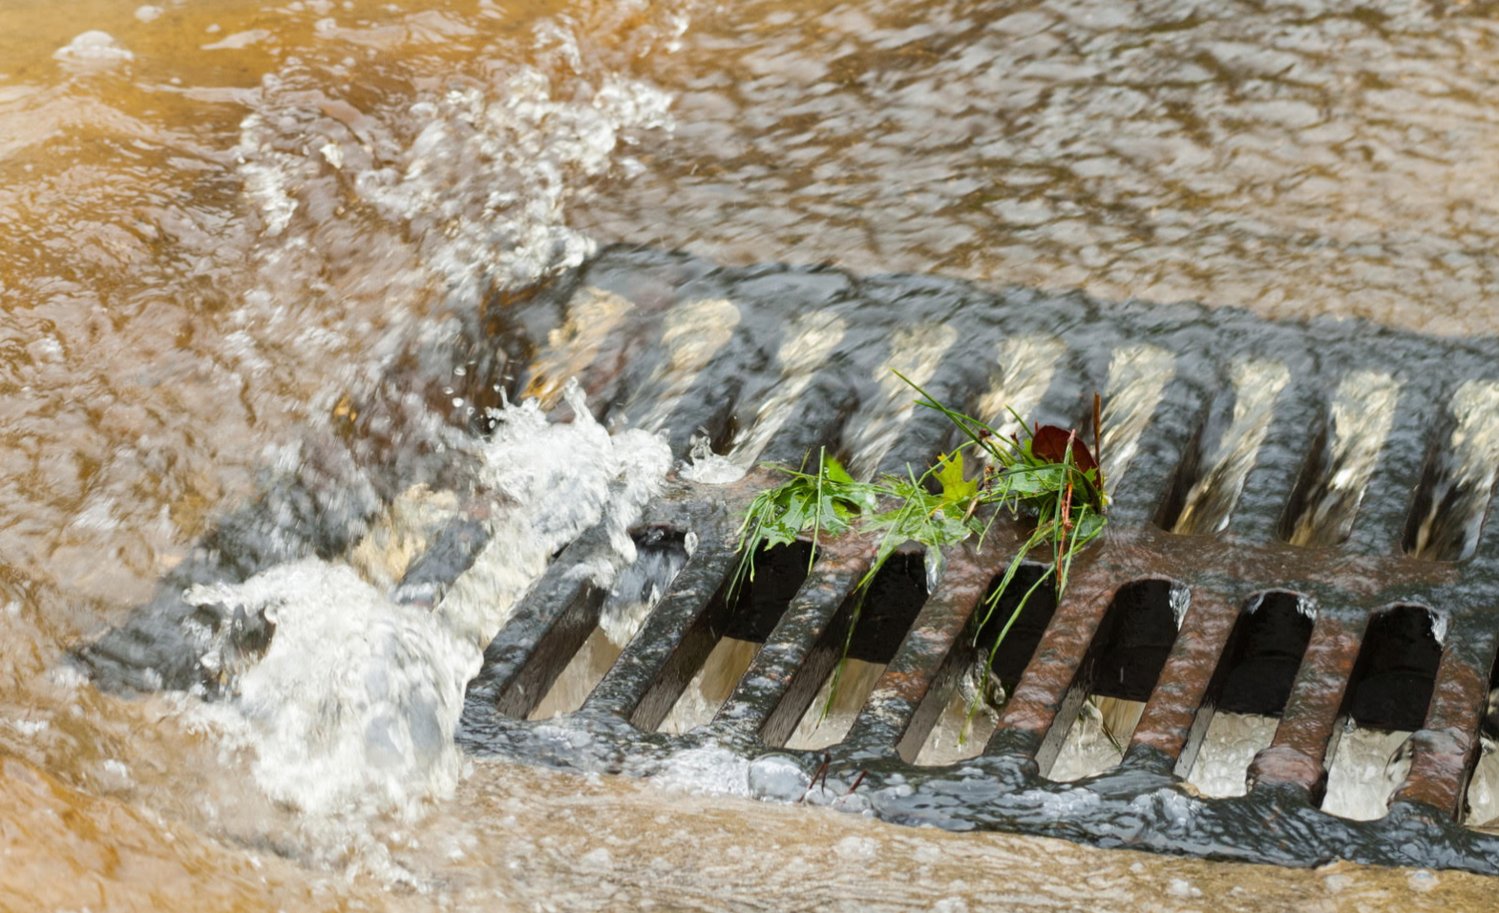 Clear storm drains help prevent local flooding. Prepare for heavy rain by removing debris from storm drains and ditches and reporting clogged ditches to local governments.